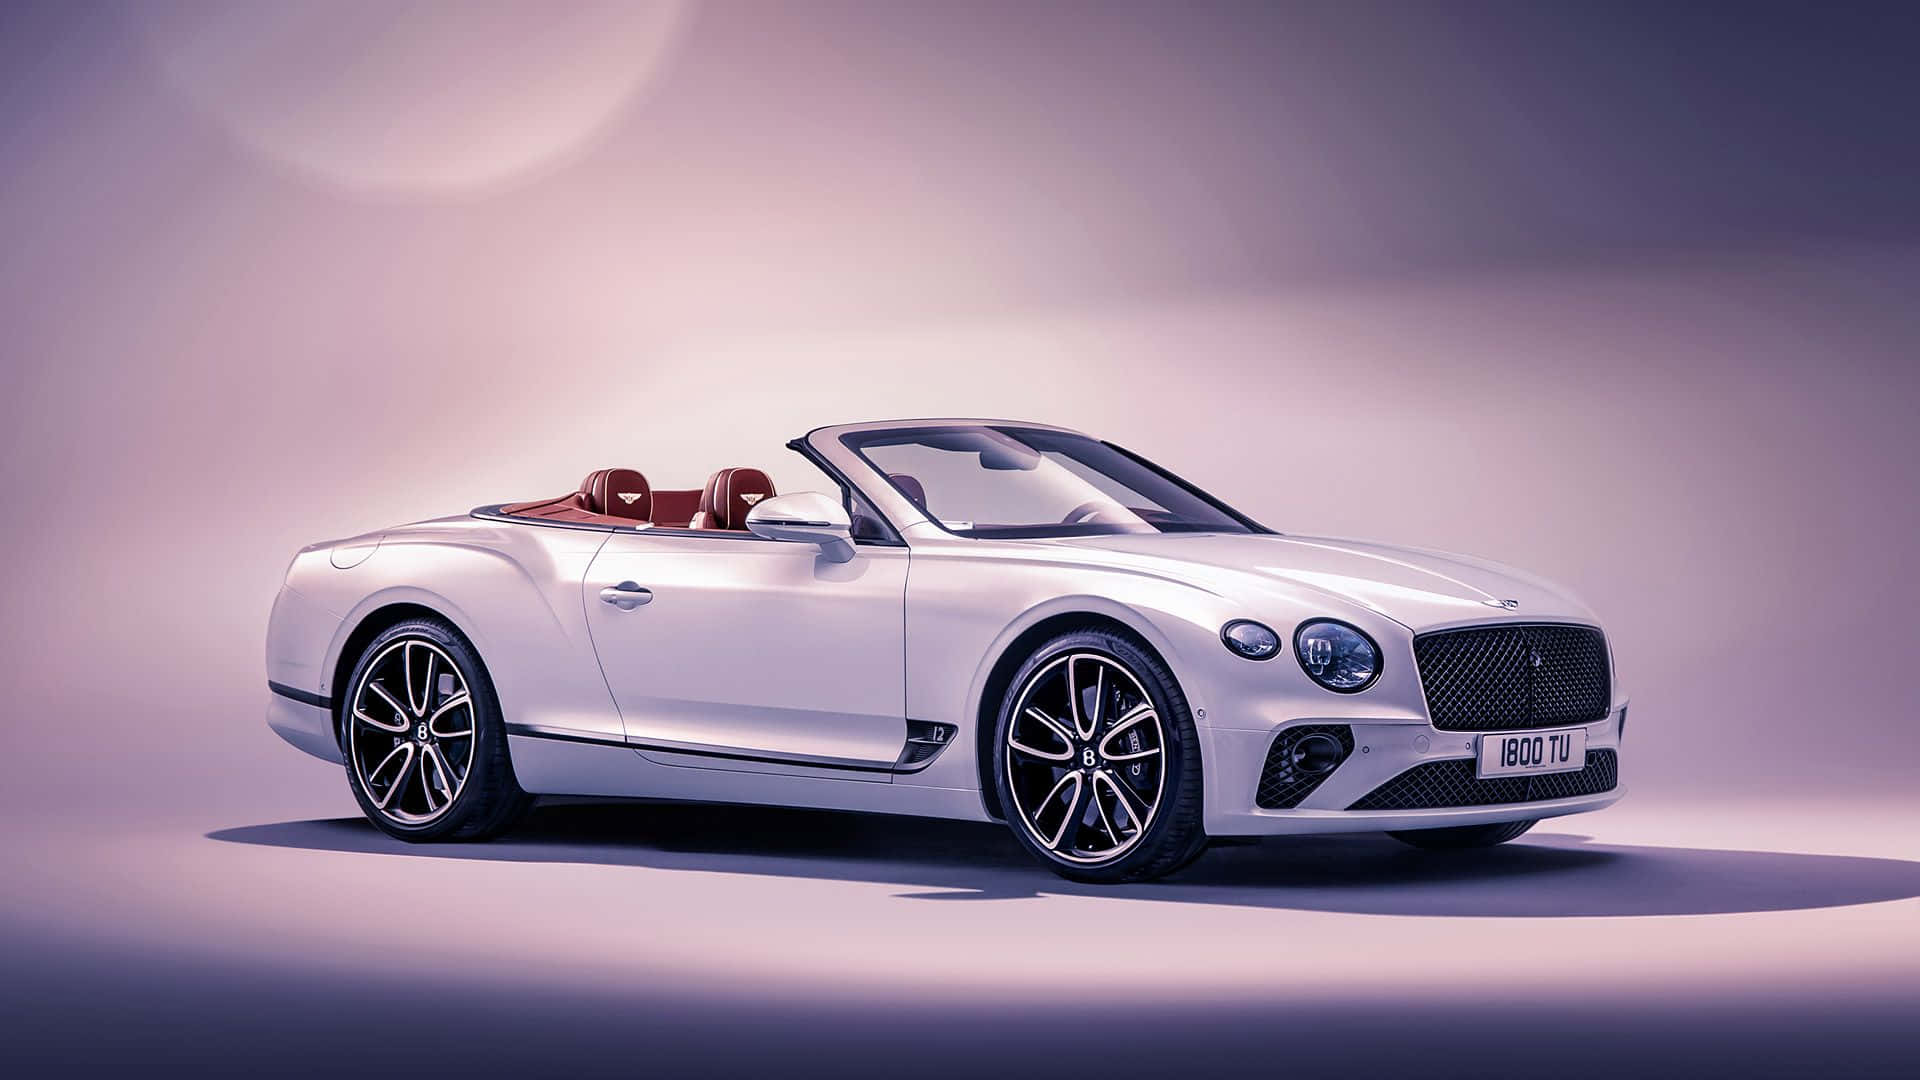 Perfection in Motion: The Bentley Exp Speed 8